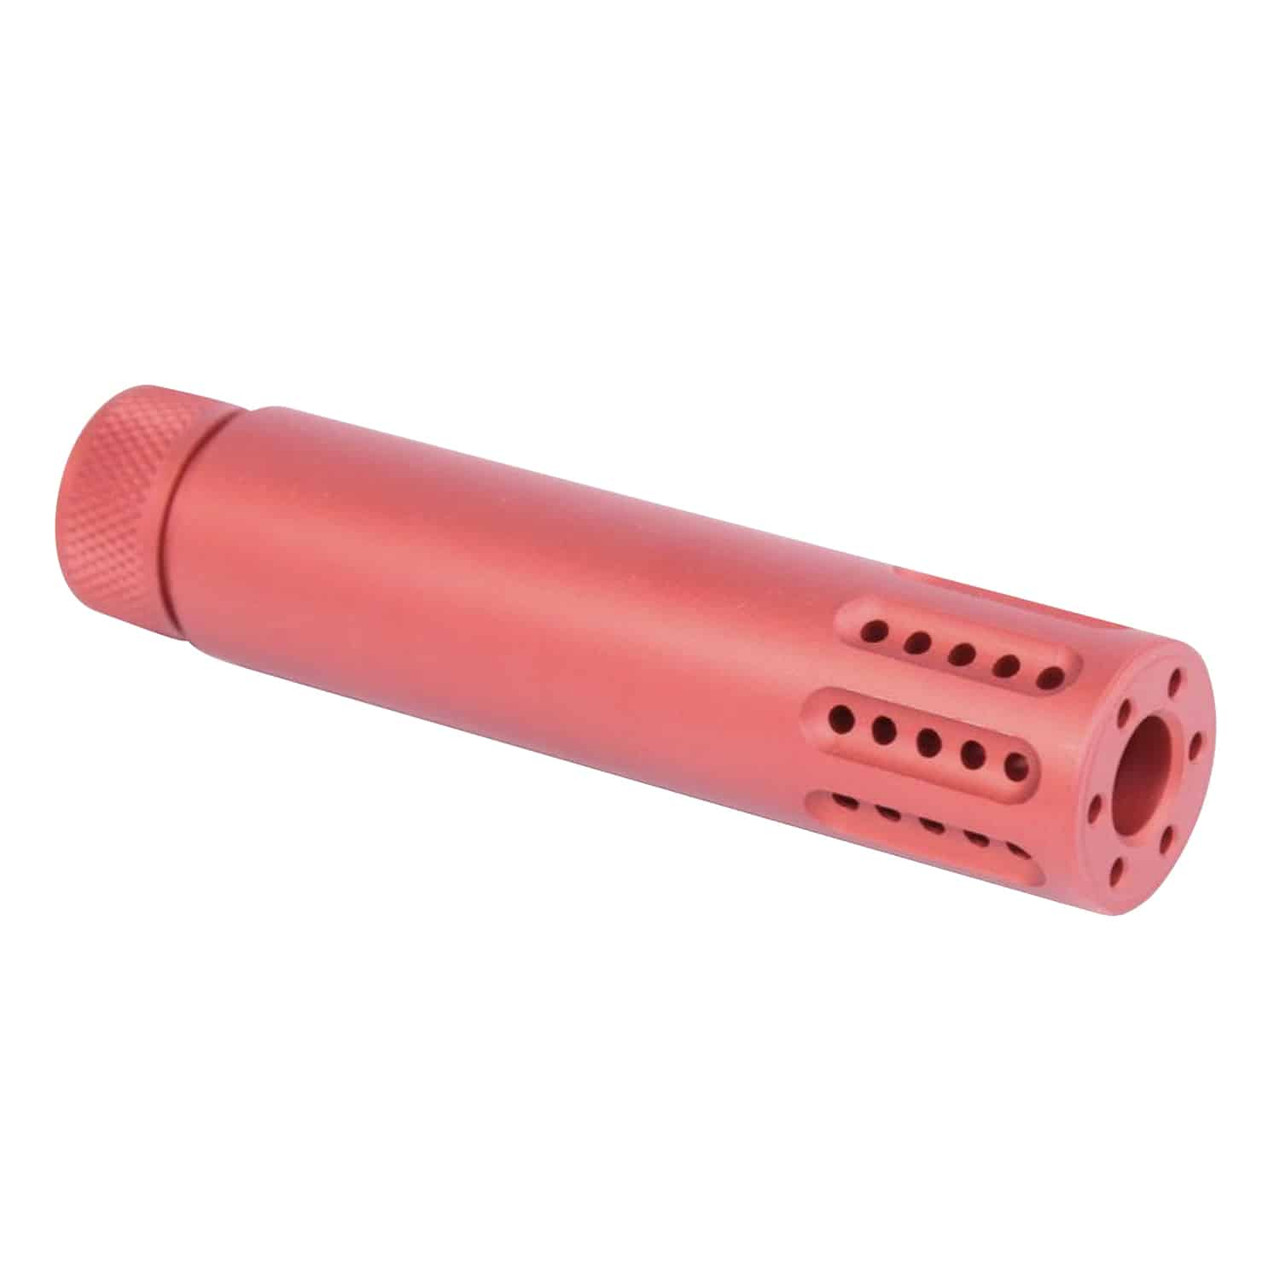 Guntec USA 1326-MB-P-RED Slip Over Barrel Shroud With Multi Port Muzzle Brake (Anodized Red)